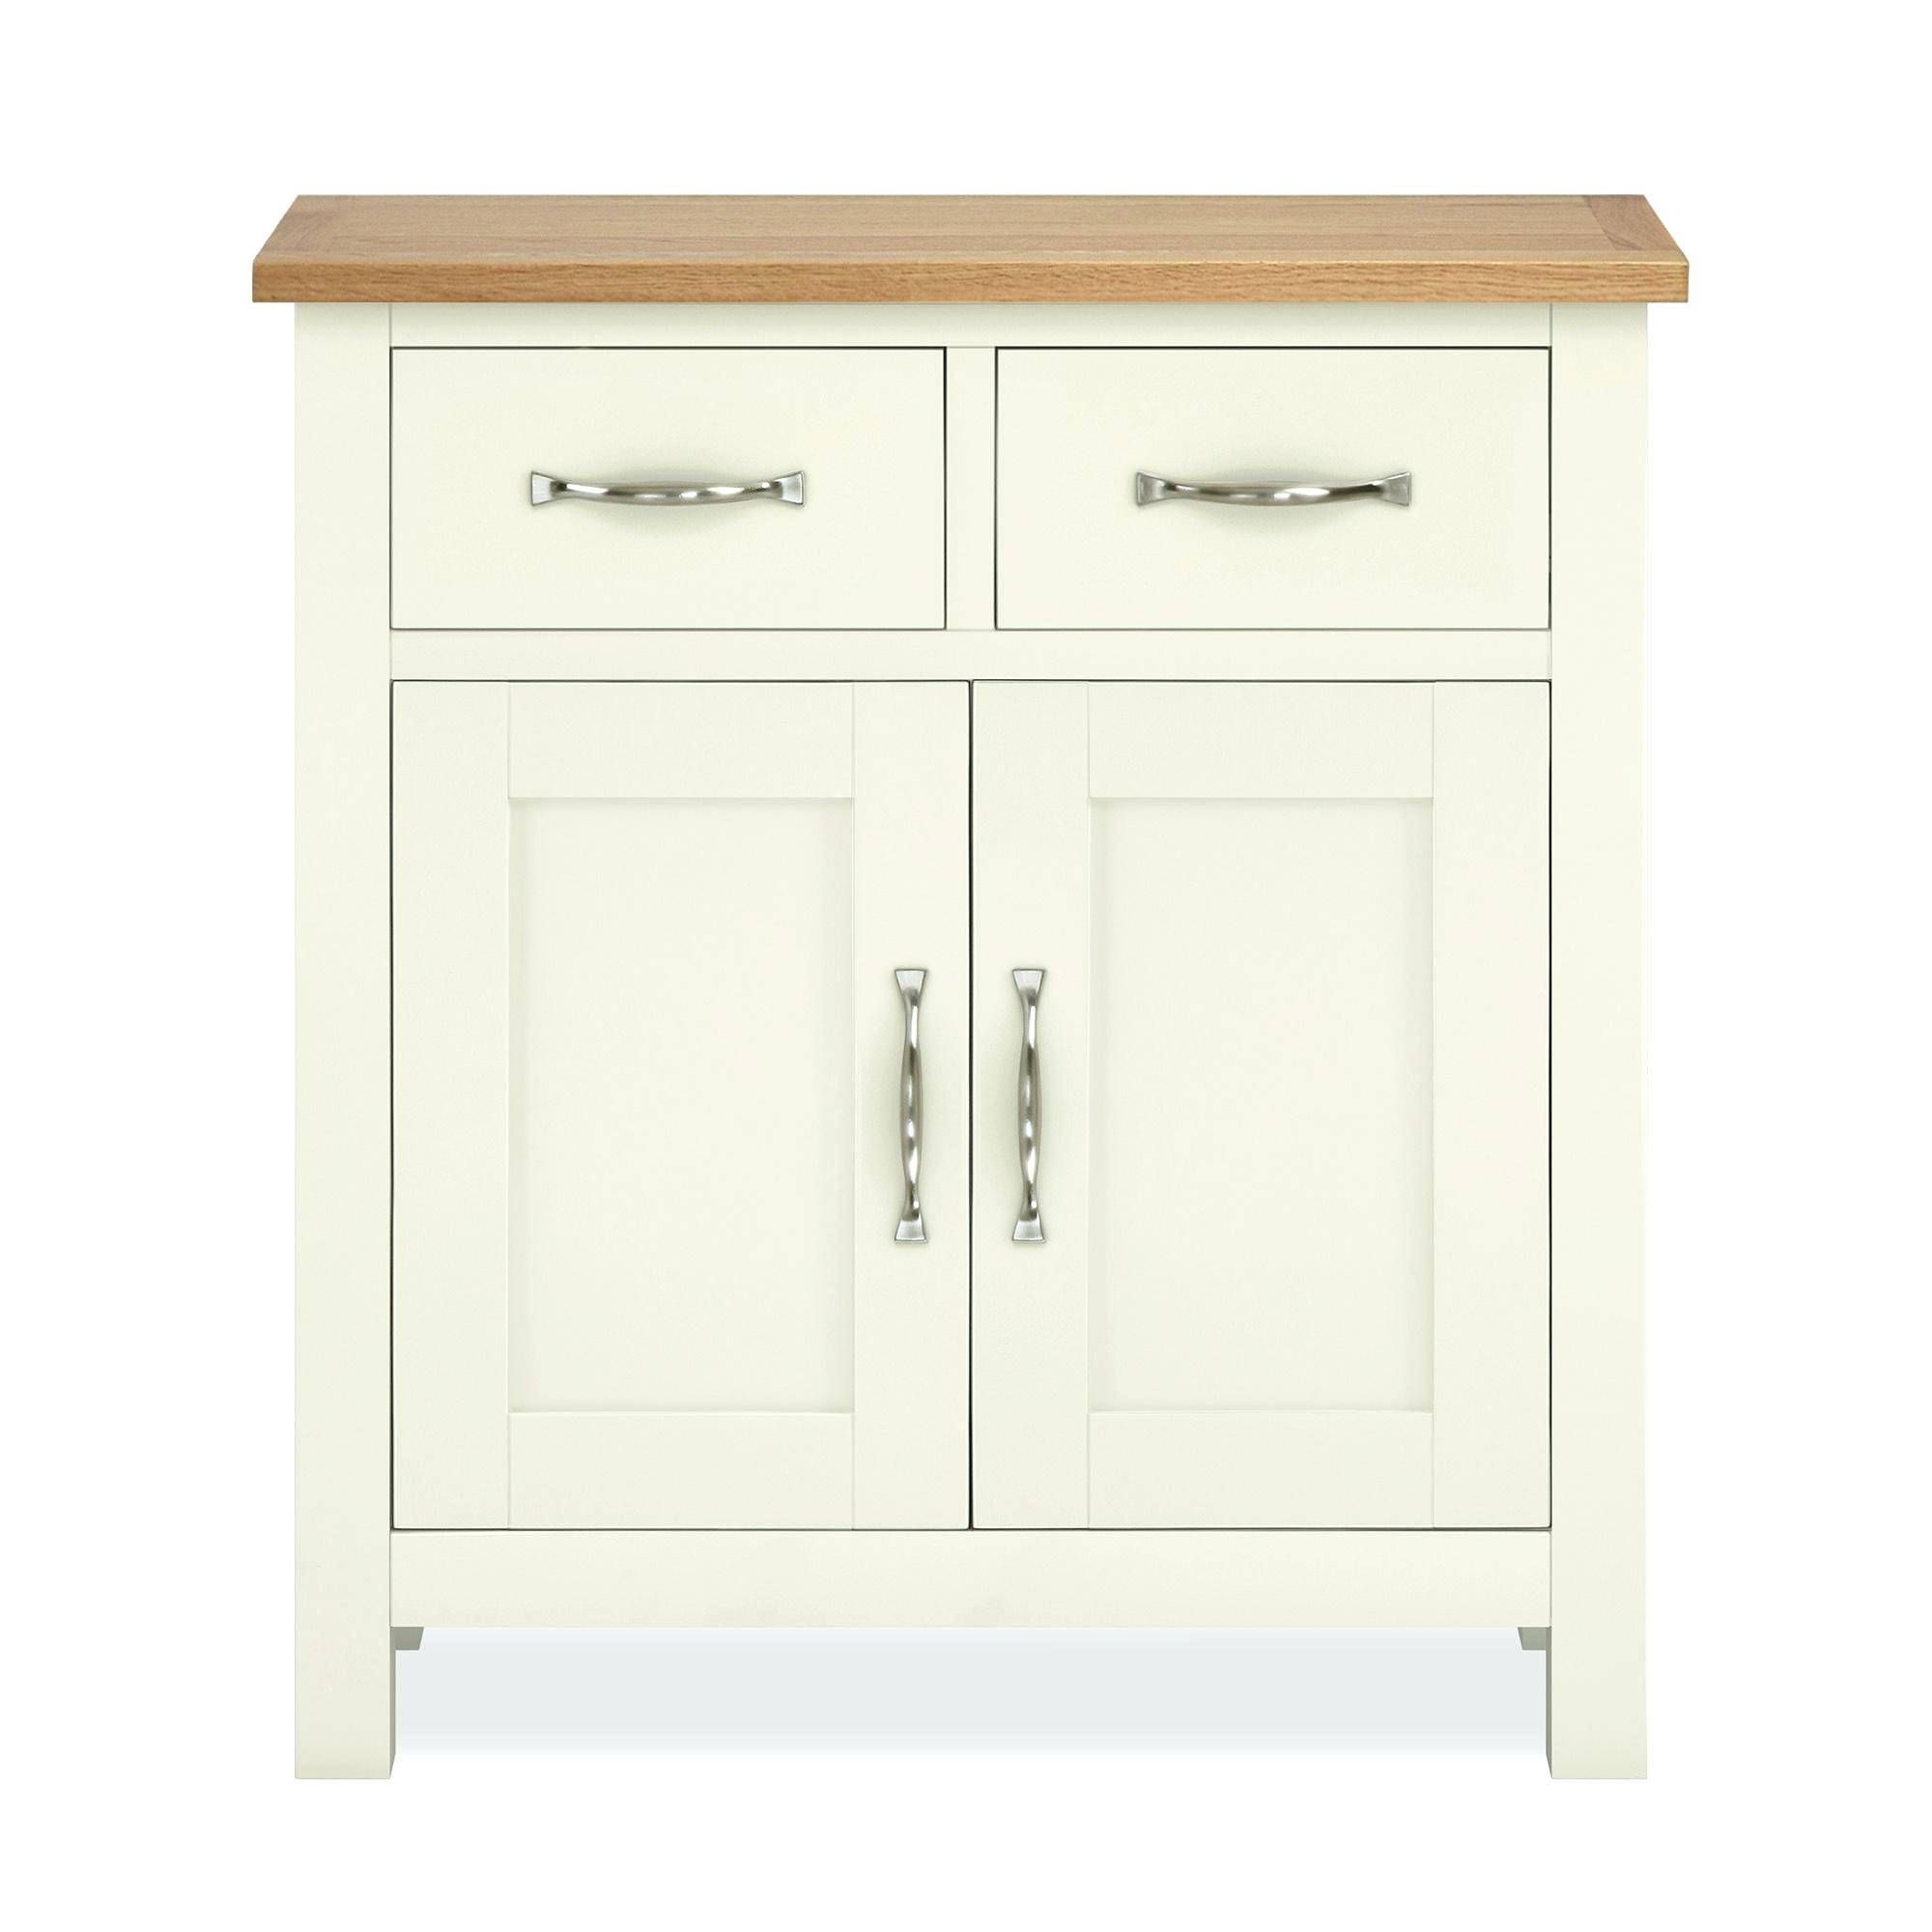 Cream Sideboard Cream Solid Oak Sideboard Large Cream Sideboard Throughout Current Cream And Oak Sideboards (View 12 of 15)